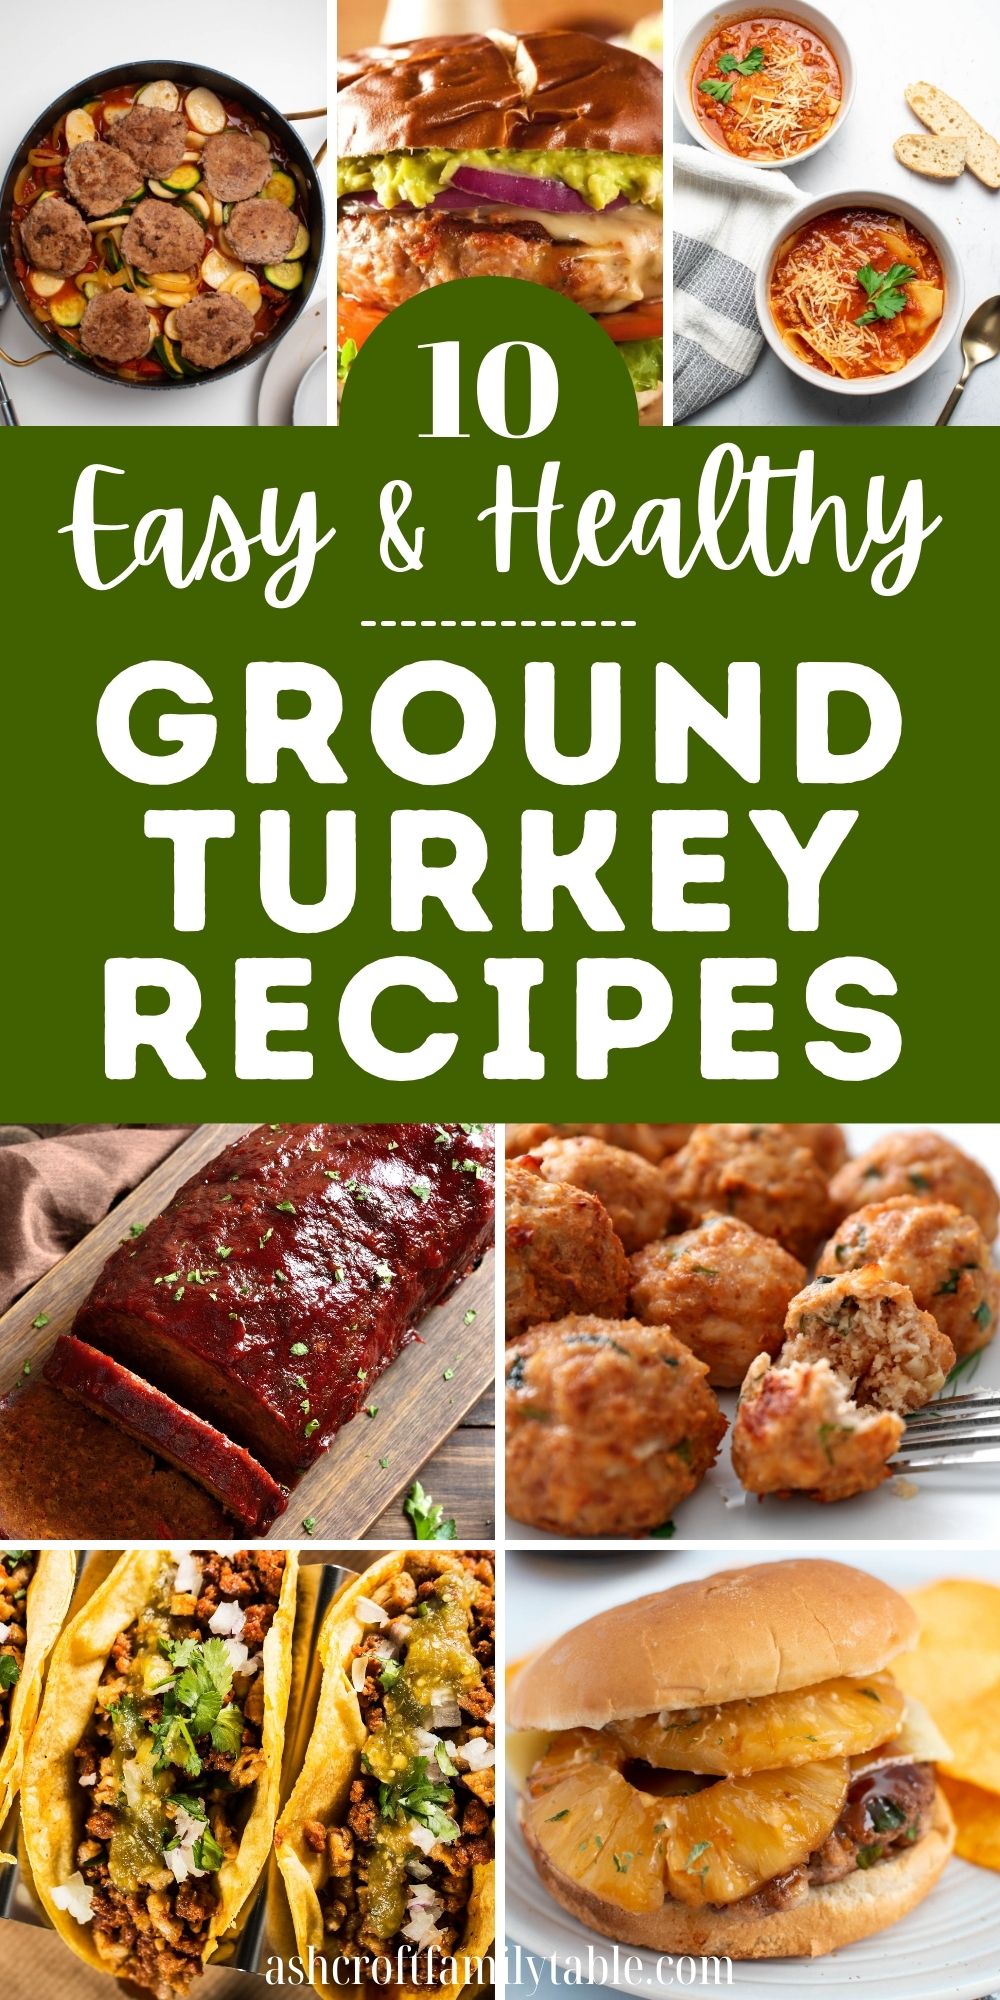 Pinterest graphic with text that reads "Easy and Healthy Ground Turkey Recipes" and a collage of ground turkey recipes.